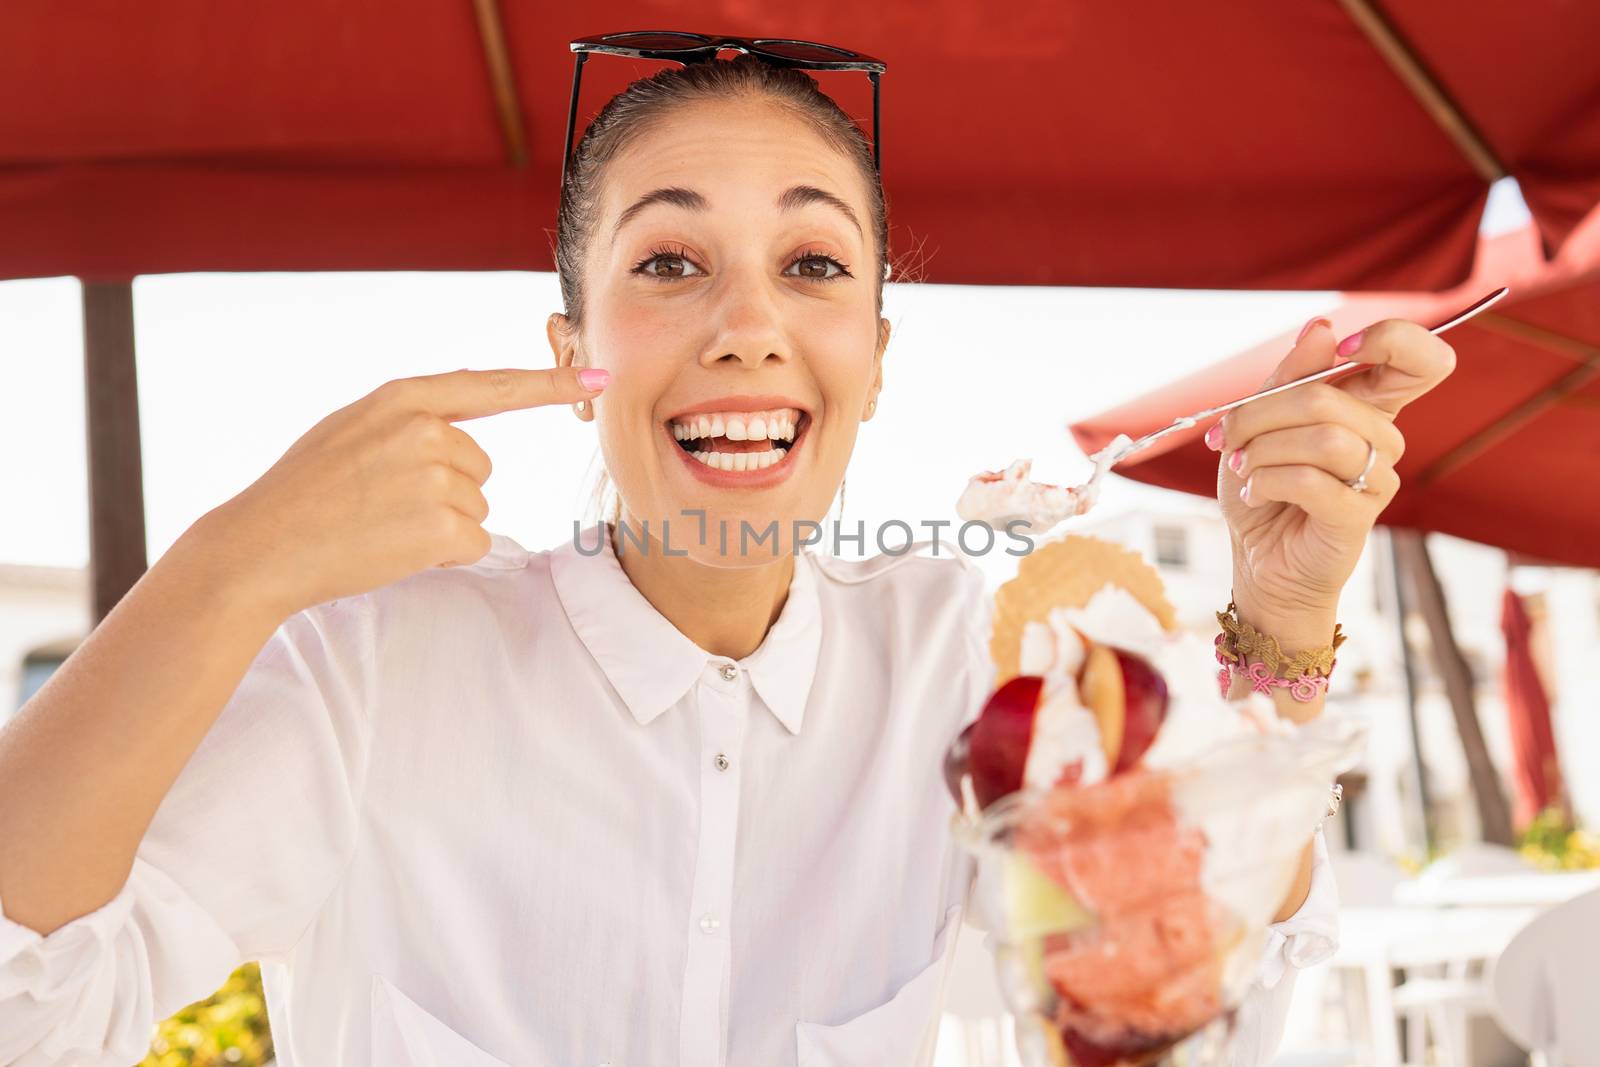 Beautiful smiling happy young caucasian woman doing yummy gesture with a finger while eating a big compound ice cream with fruit - New alimentary bad human habits of gluttony people by robbyfontanesi